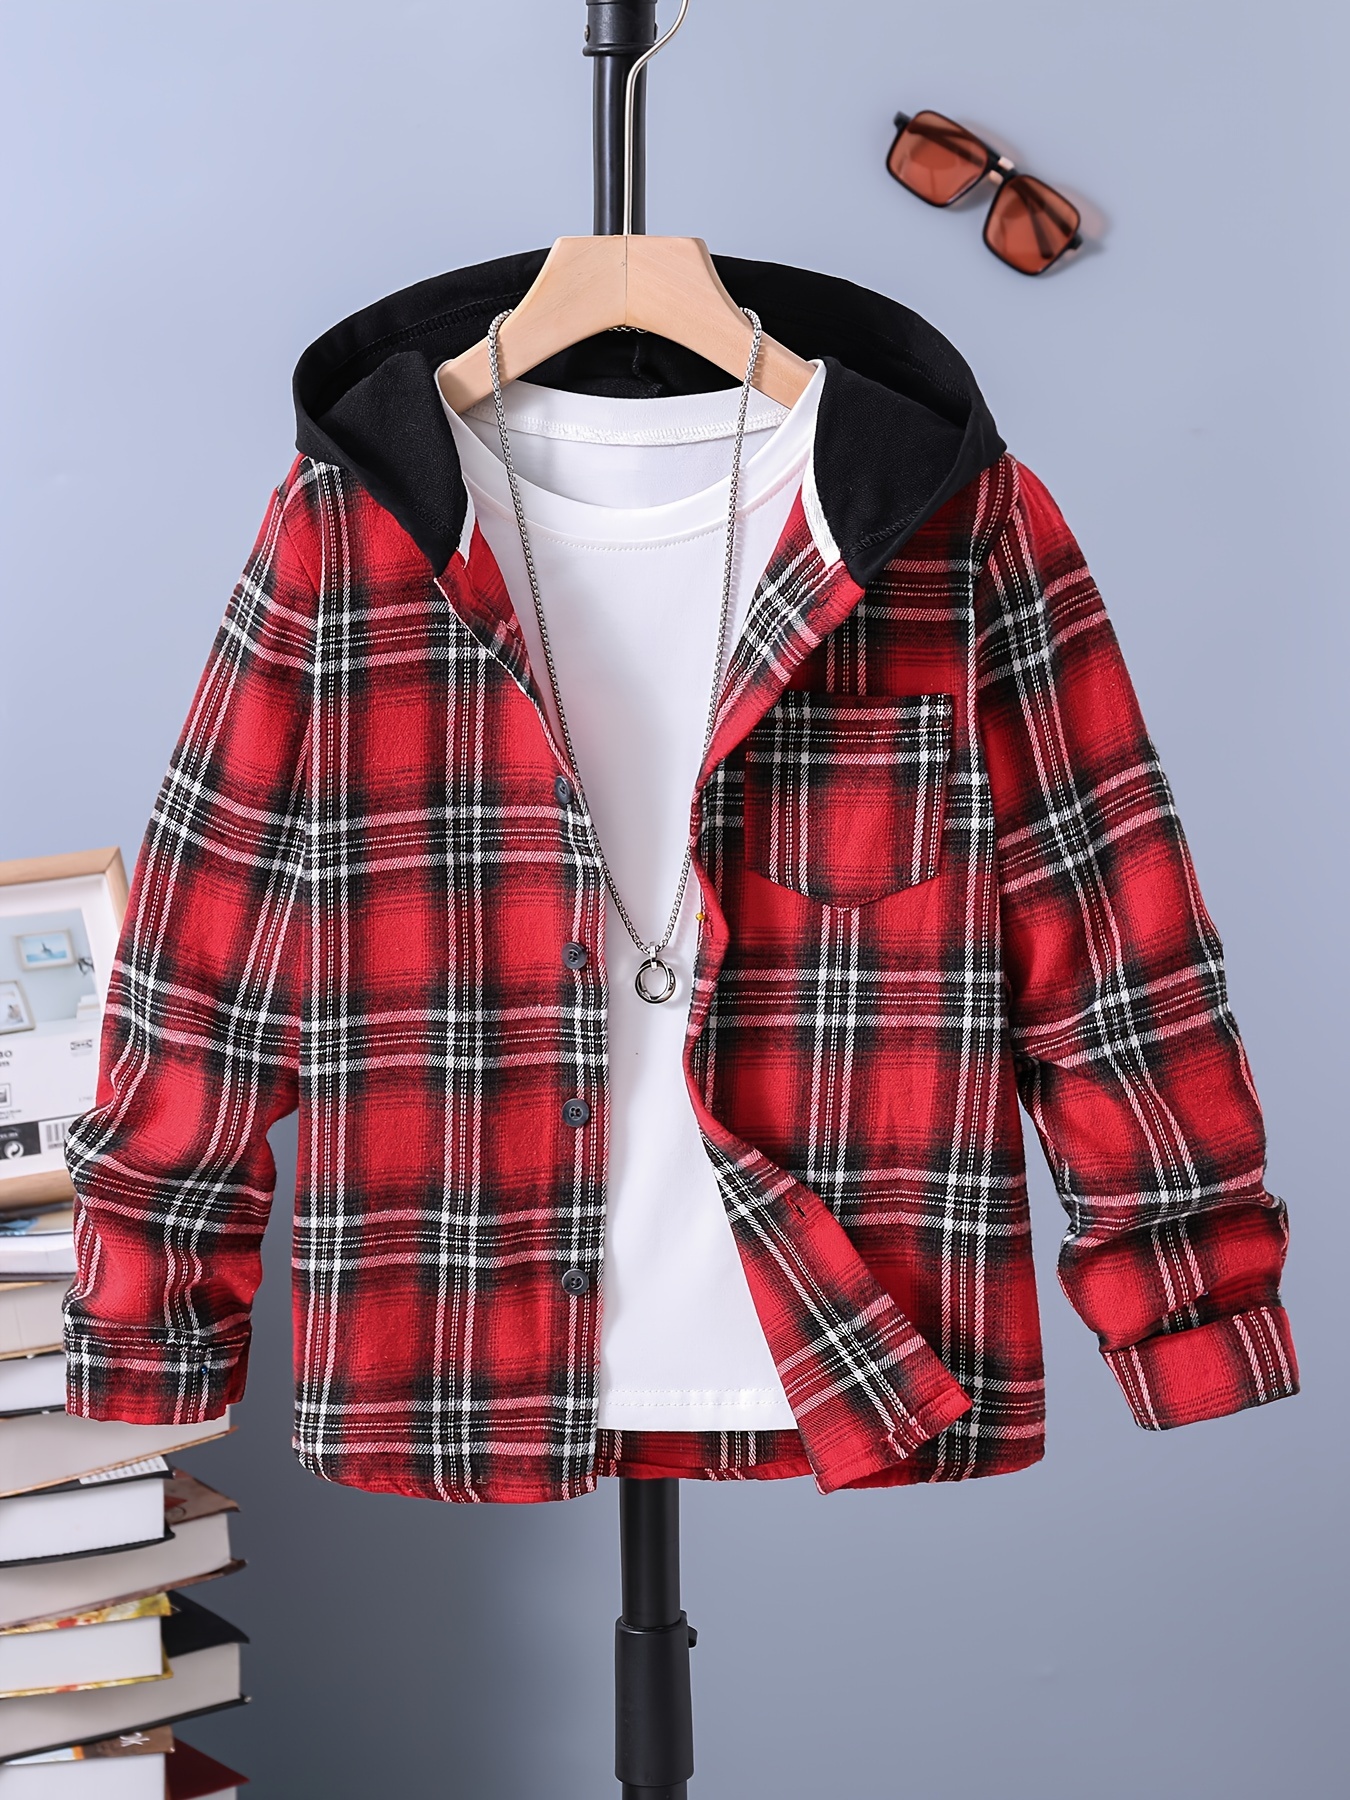 Kids Boys Plaid Hooded Shirts Long Sleeve Button Down Hoodie, Pullover Tops Spring Fall Outwear Shirts Jacket Clothes